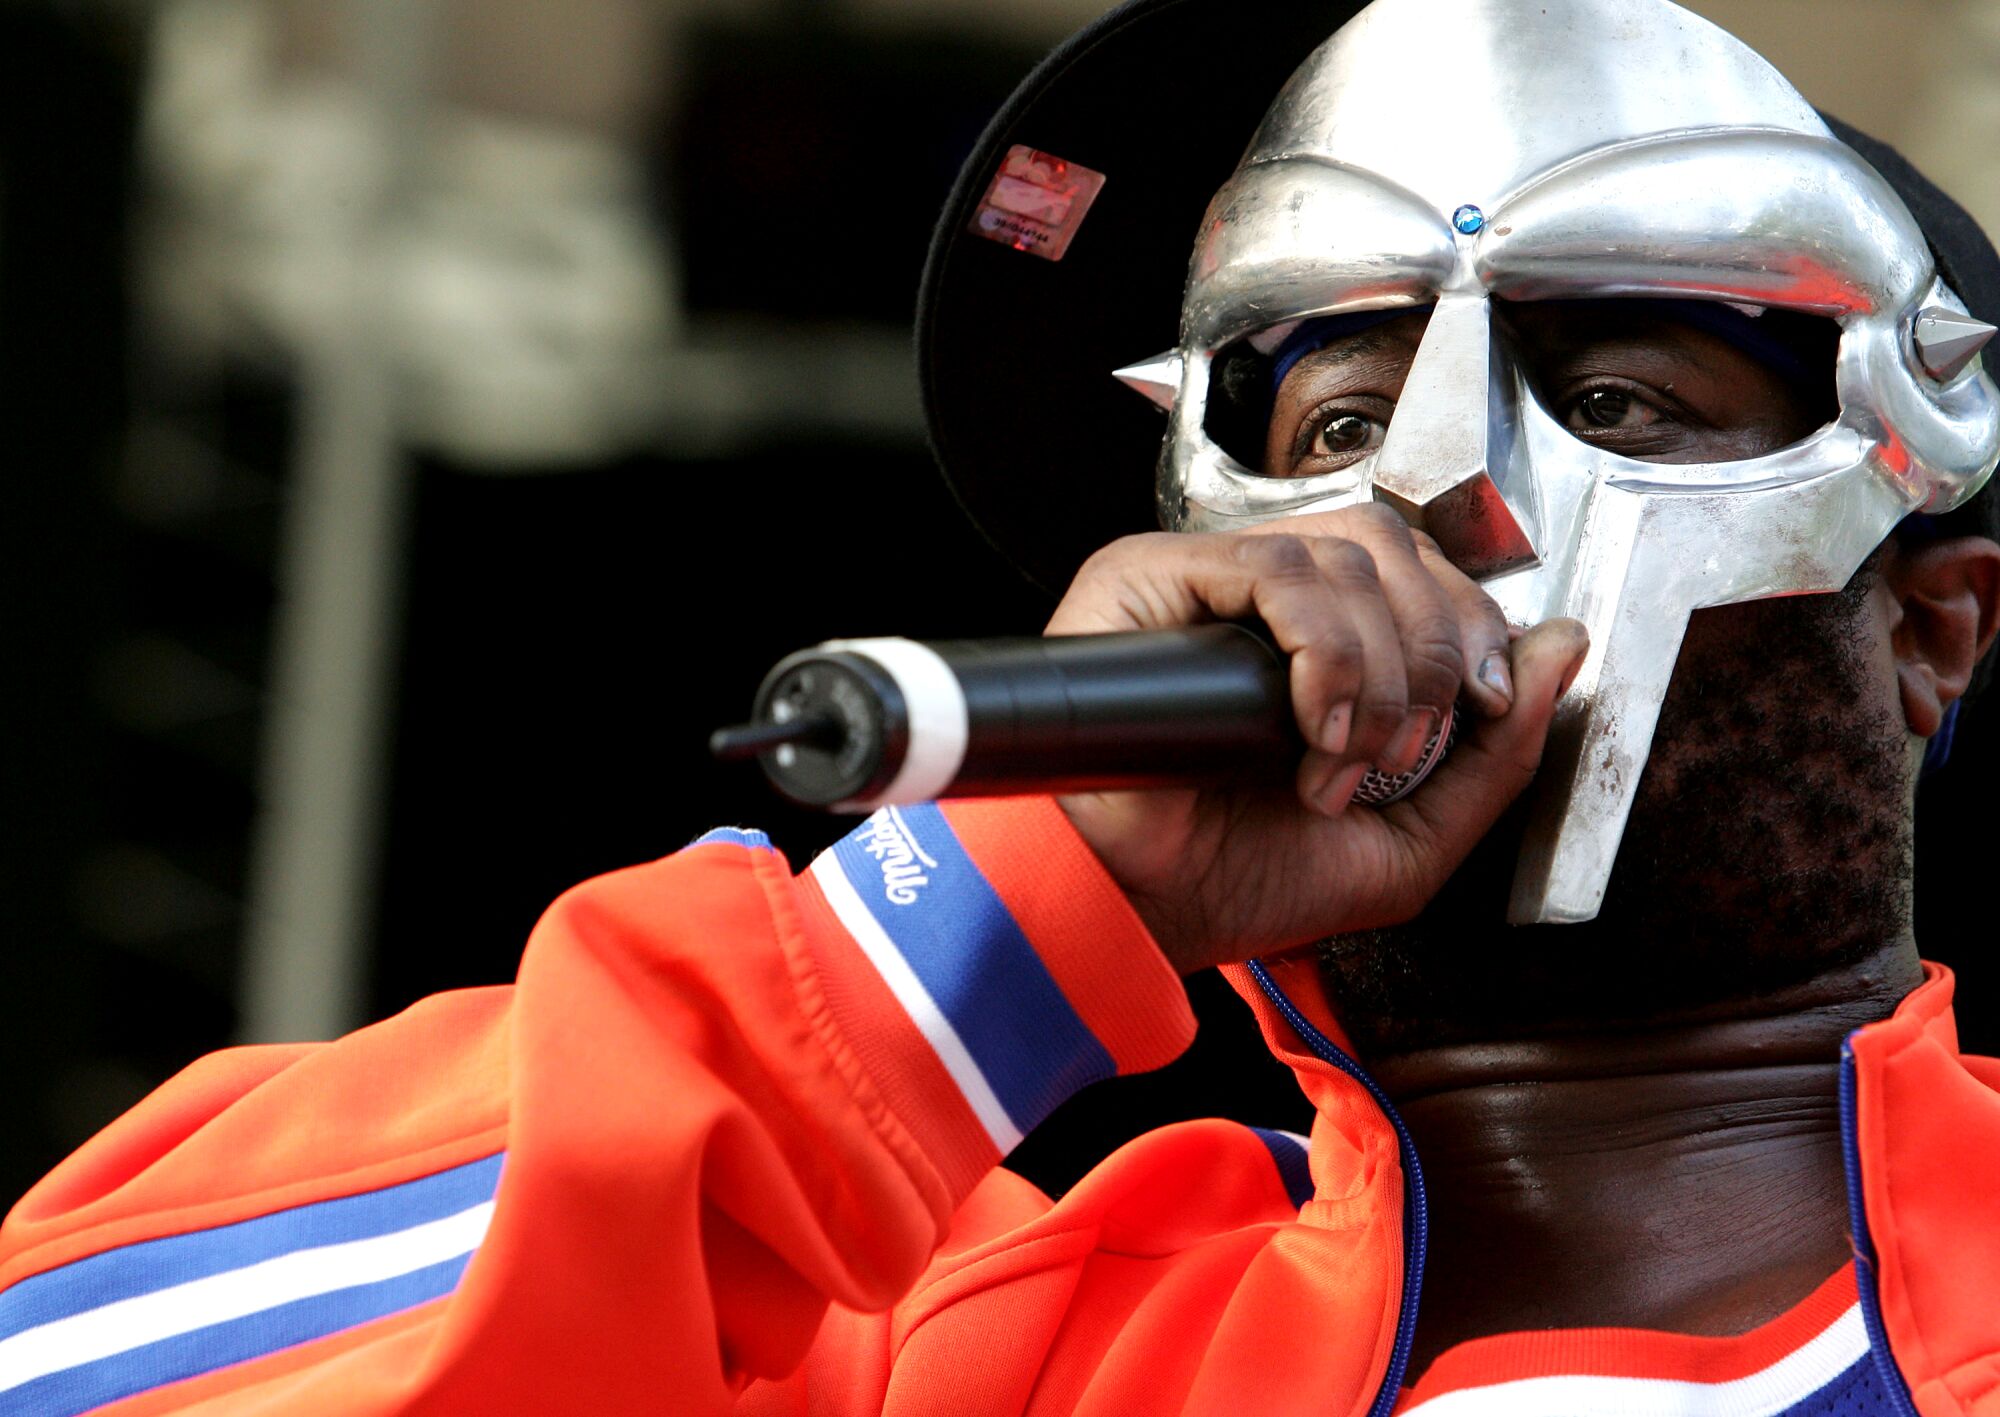 A rapper in a mask performs onstage.